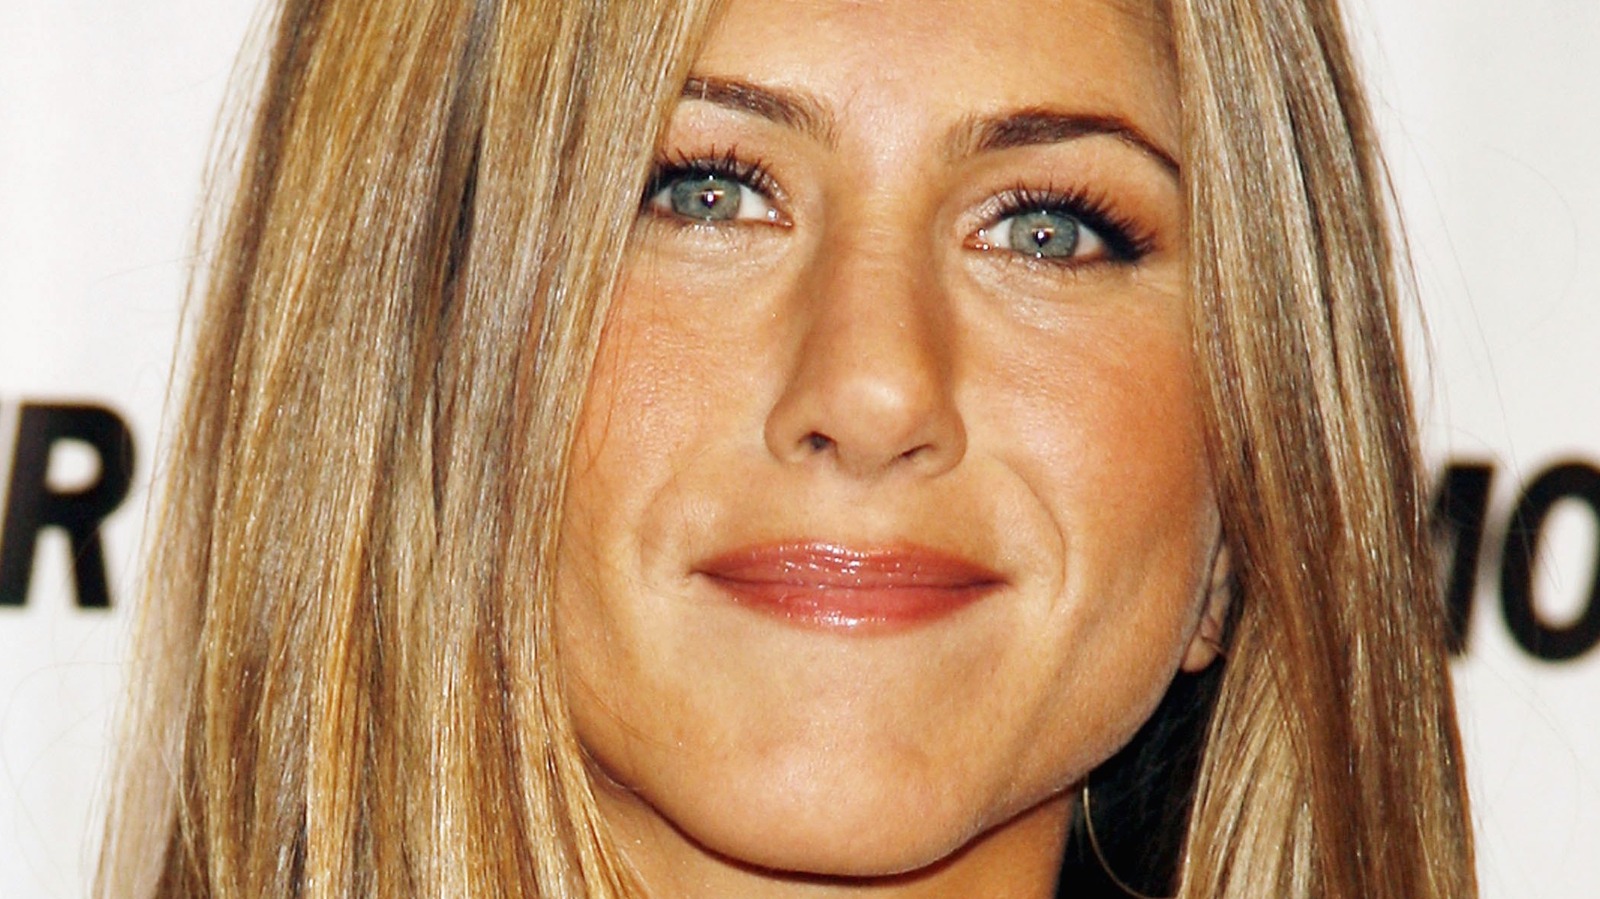 The Question From David Letterman That Made Jennifer Aniston Uncomfortable